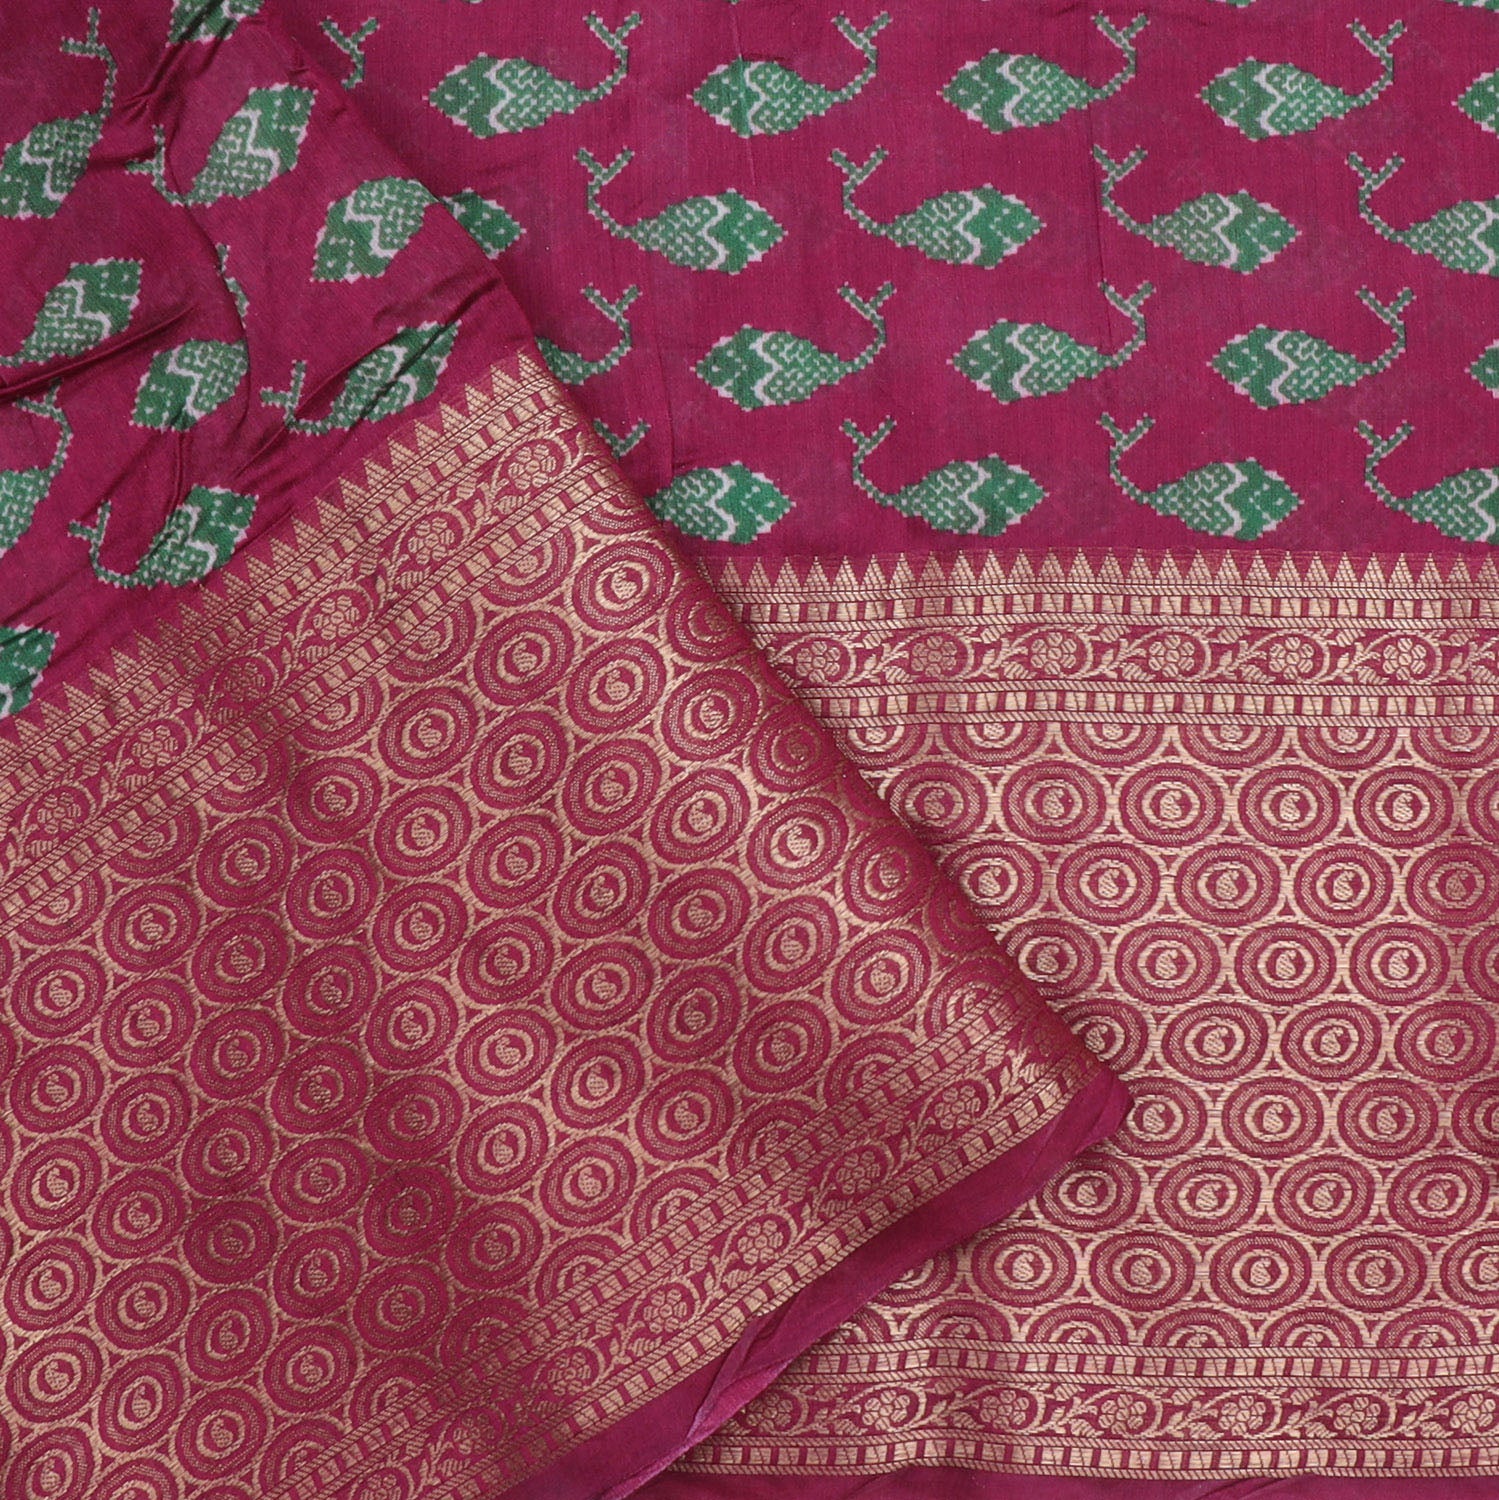 Dark Green Cotton Saree With Printed Ikat Pattern - Singhania's